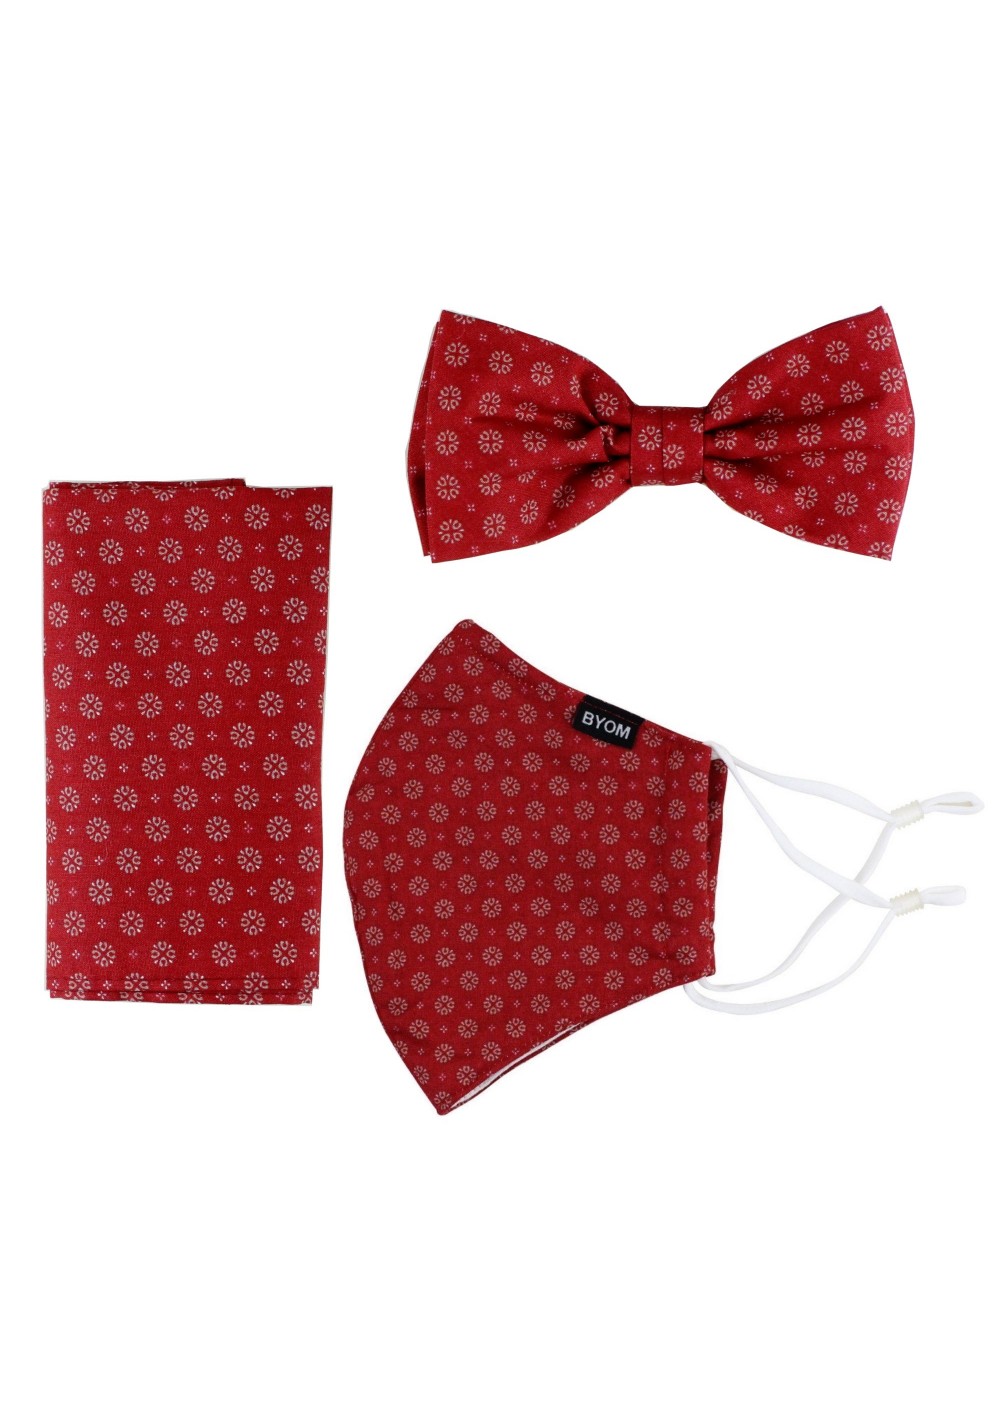 Bow Tie + Face Mask Set in Cherry Red